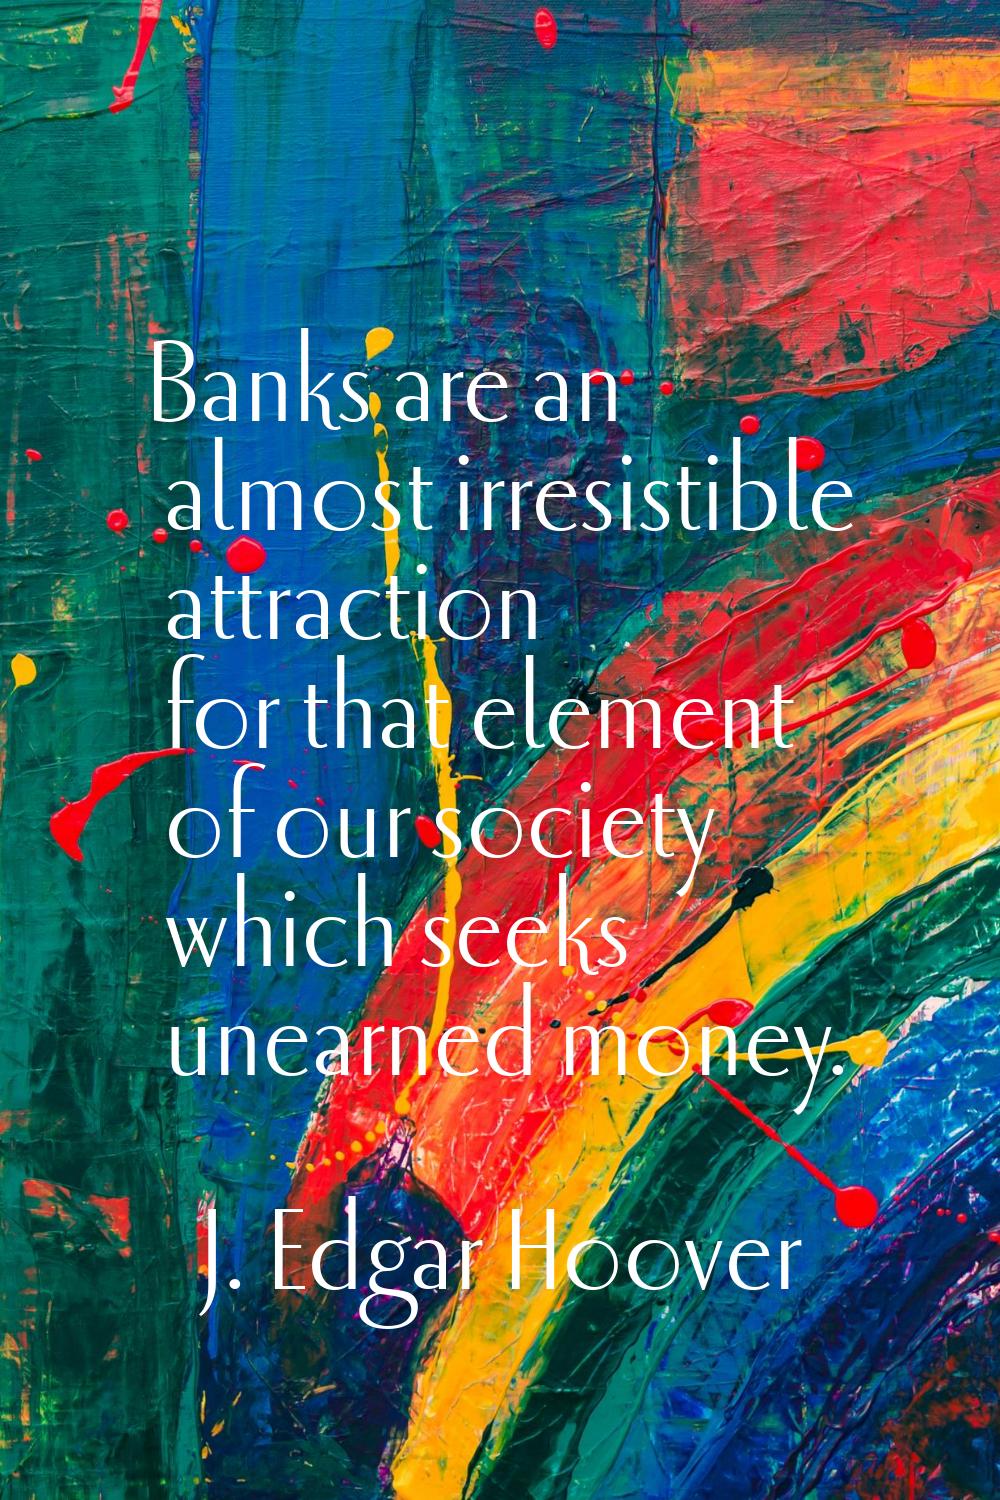 Banks are an almost irresistible attraction for that element of our society which seeks unearned mo